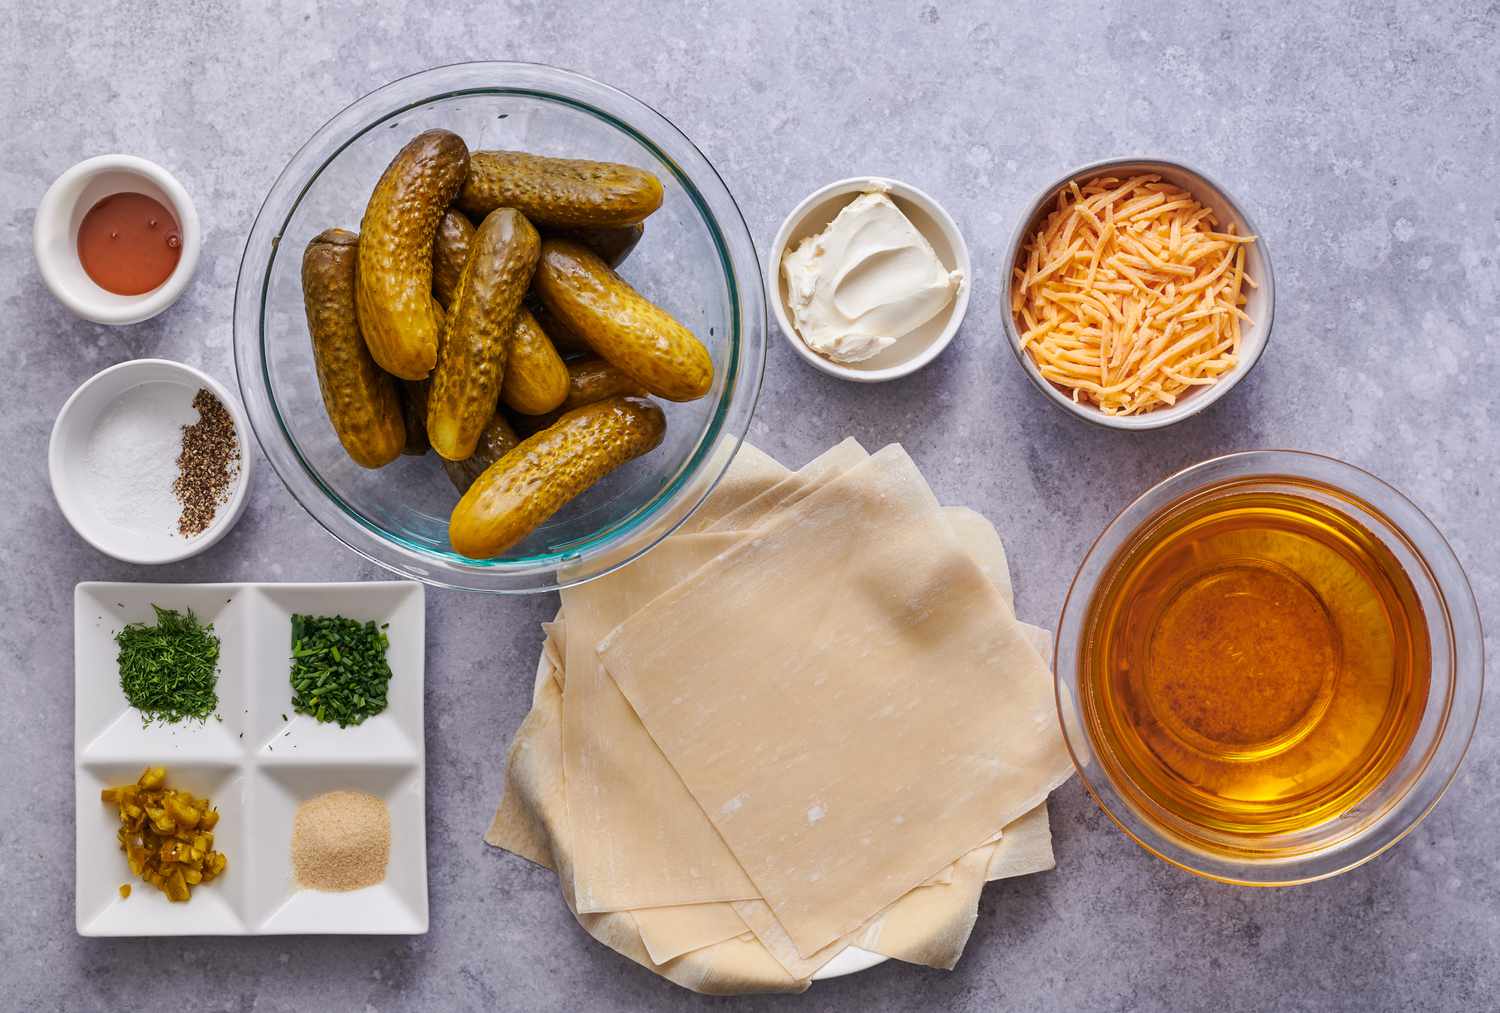 Ingredients to make stuffed fried pickles